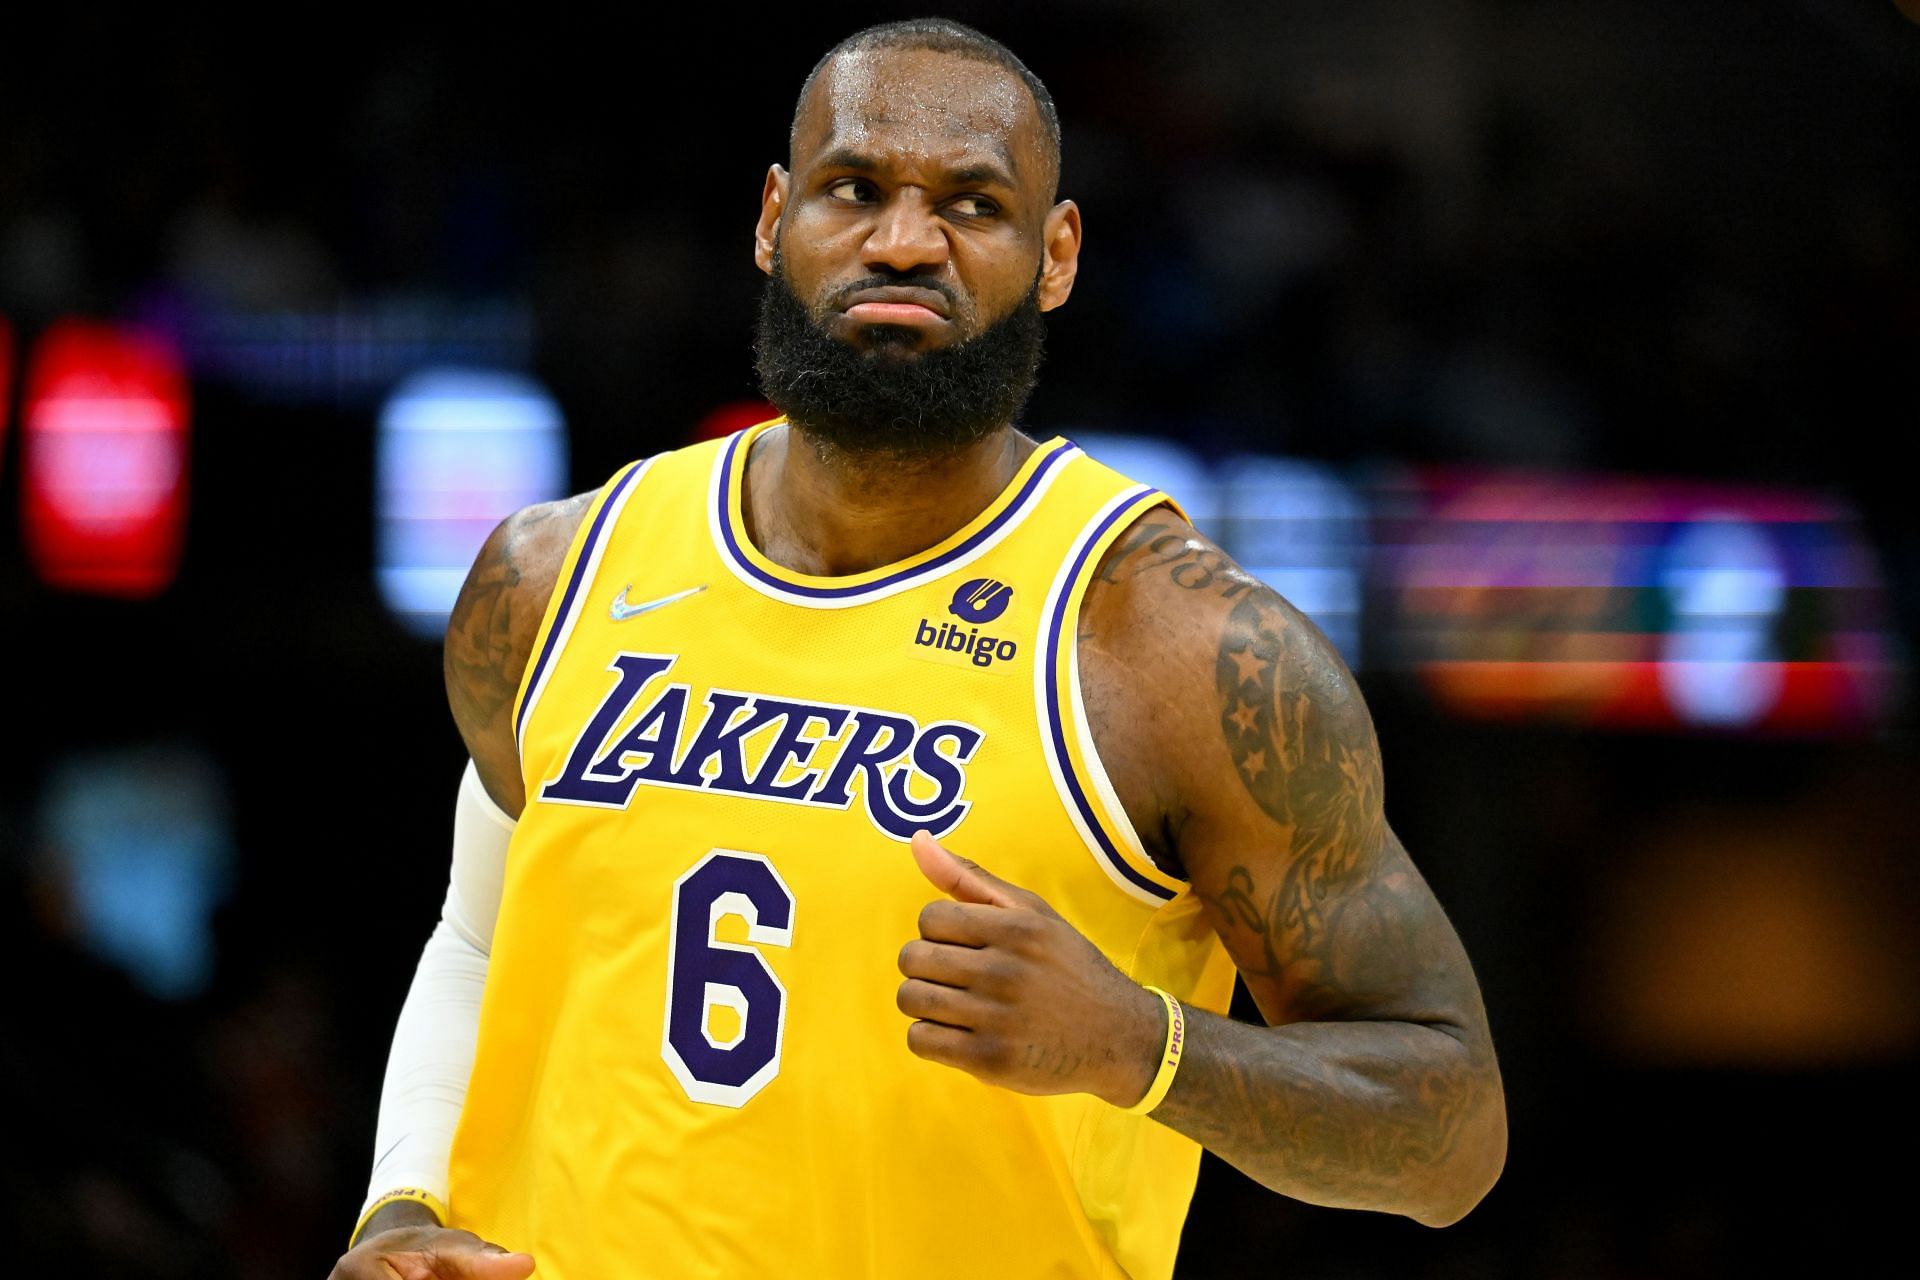 LeBron James had 39 points in the 116-108 loss to the New Orleans Pelicans on Sunday.